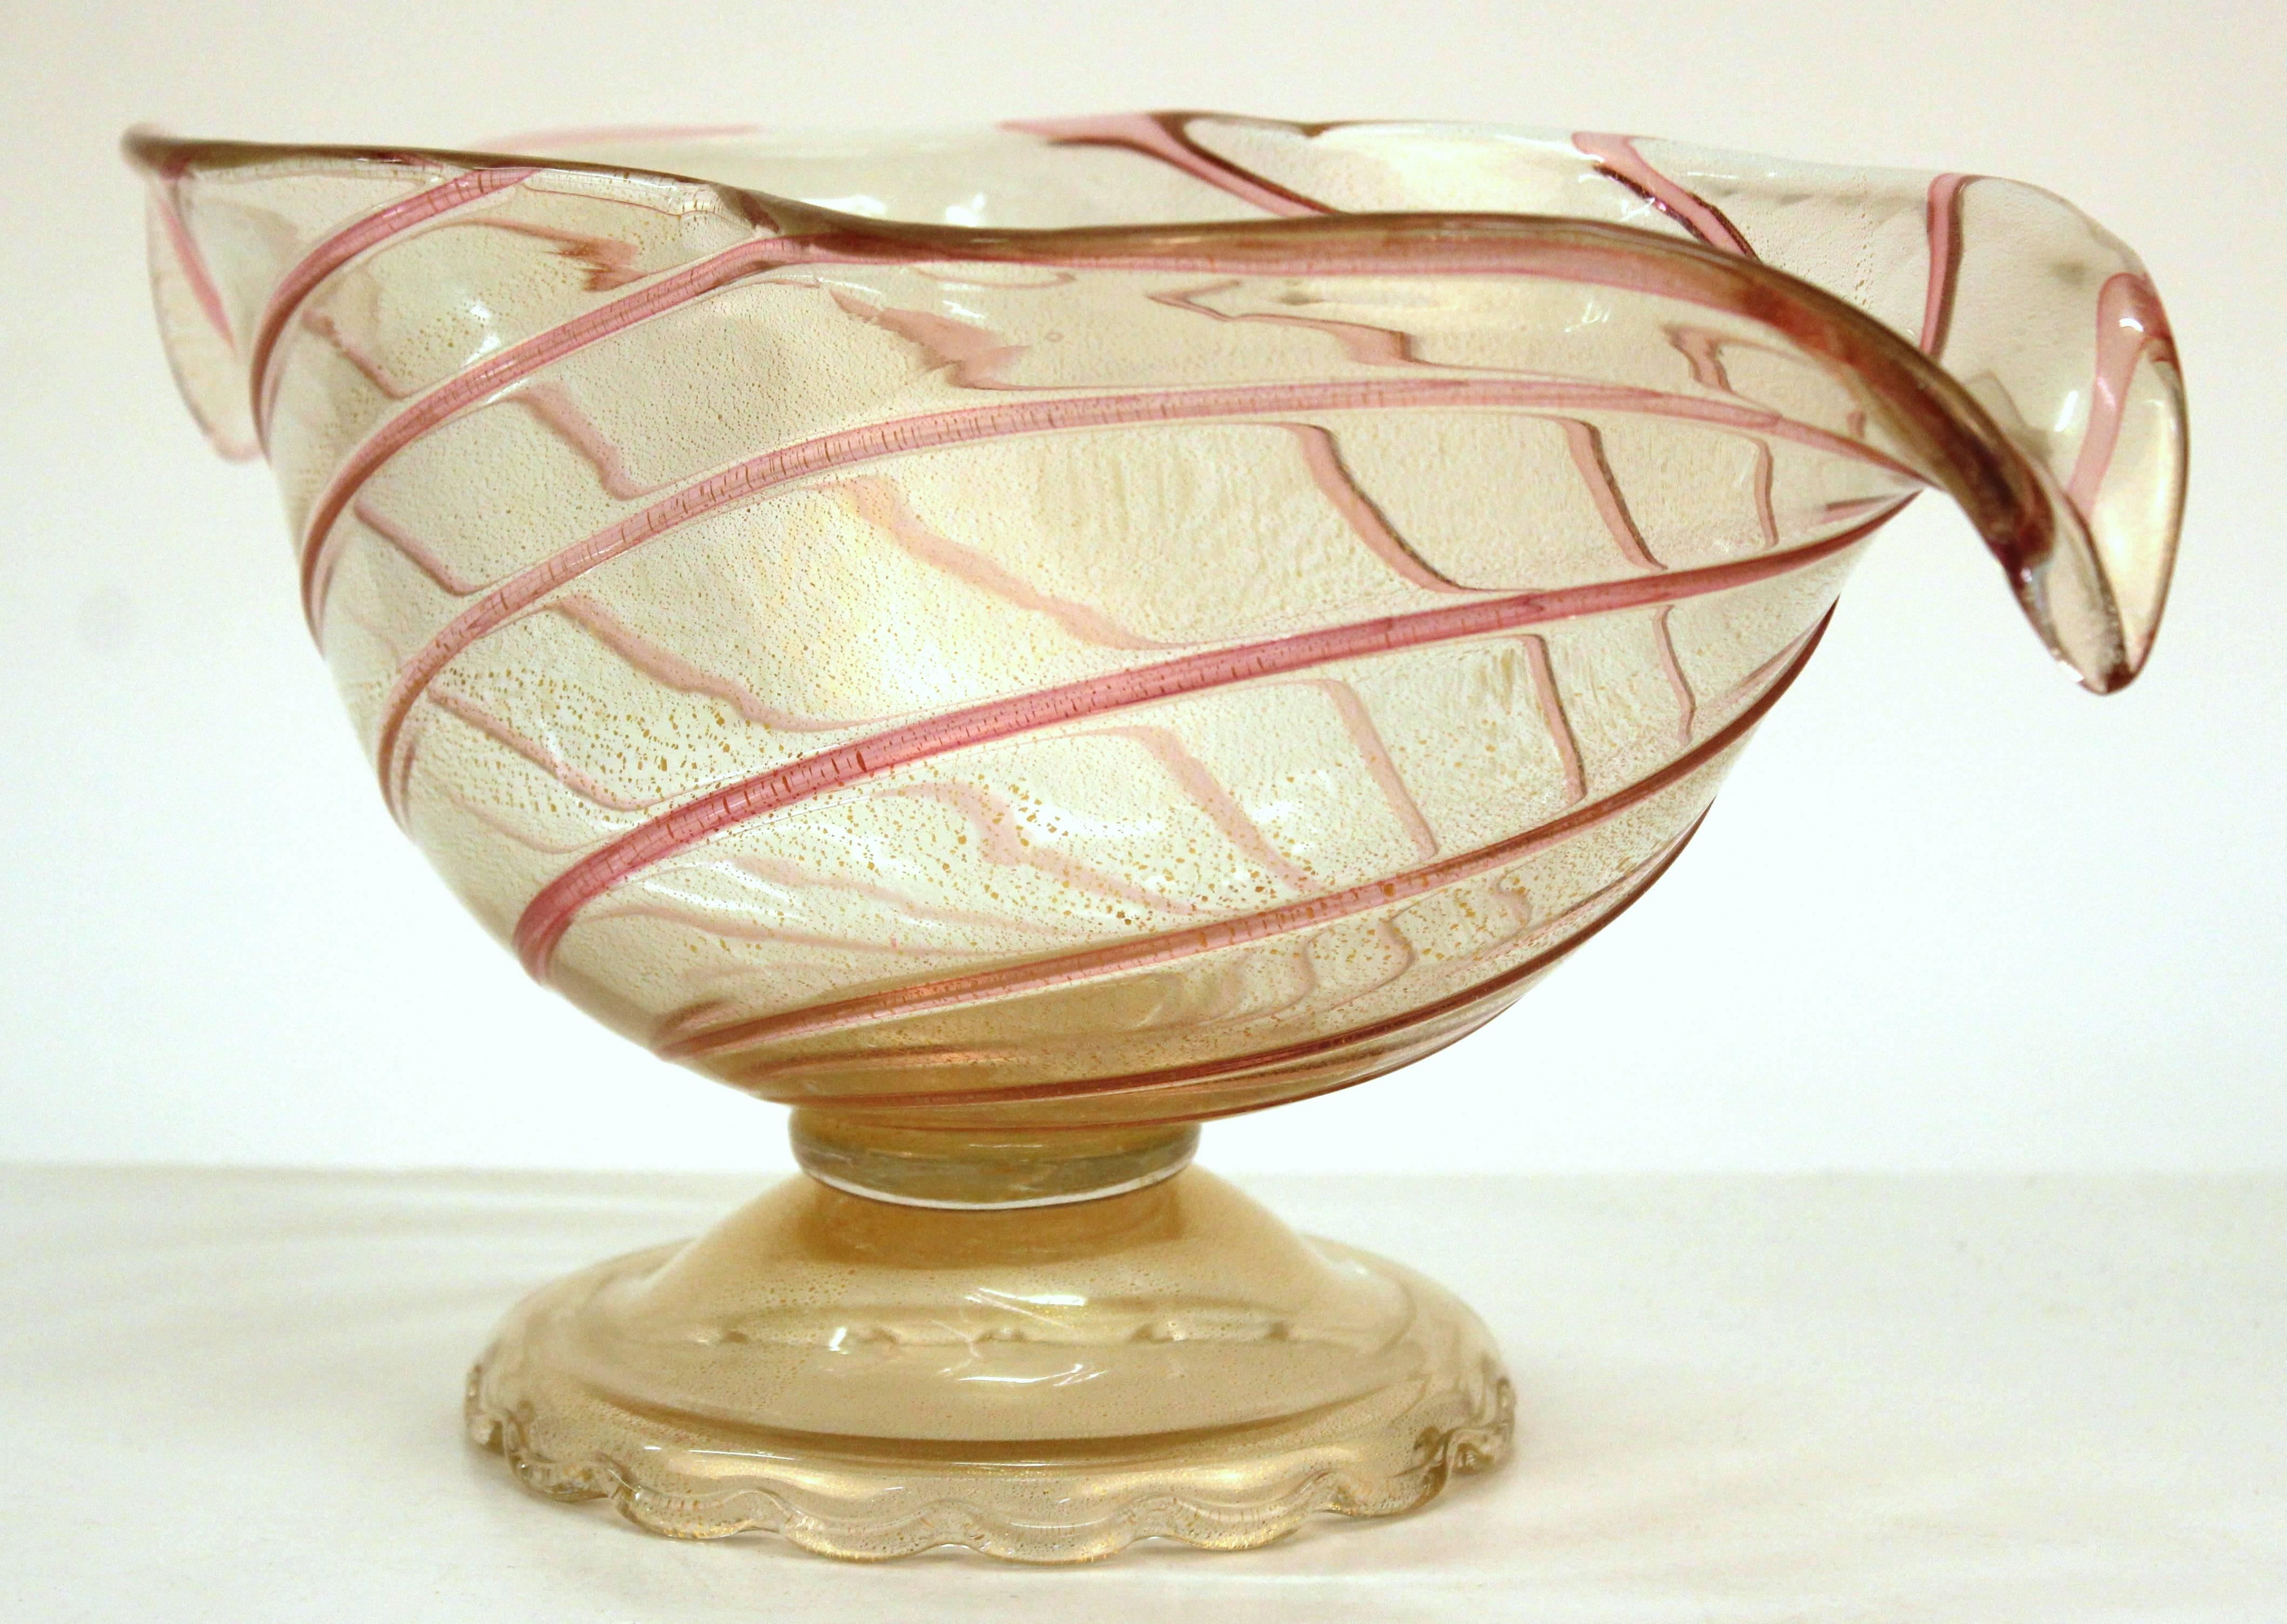 An elongated Murano glass vase or bowl with a pink swirl on a pedestal with footed base. The glass features gold inclusions. This vase is in good vintage condition and has wear consistent with age and use.